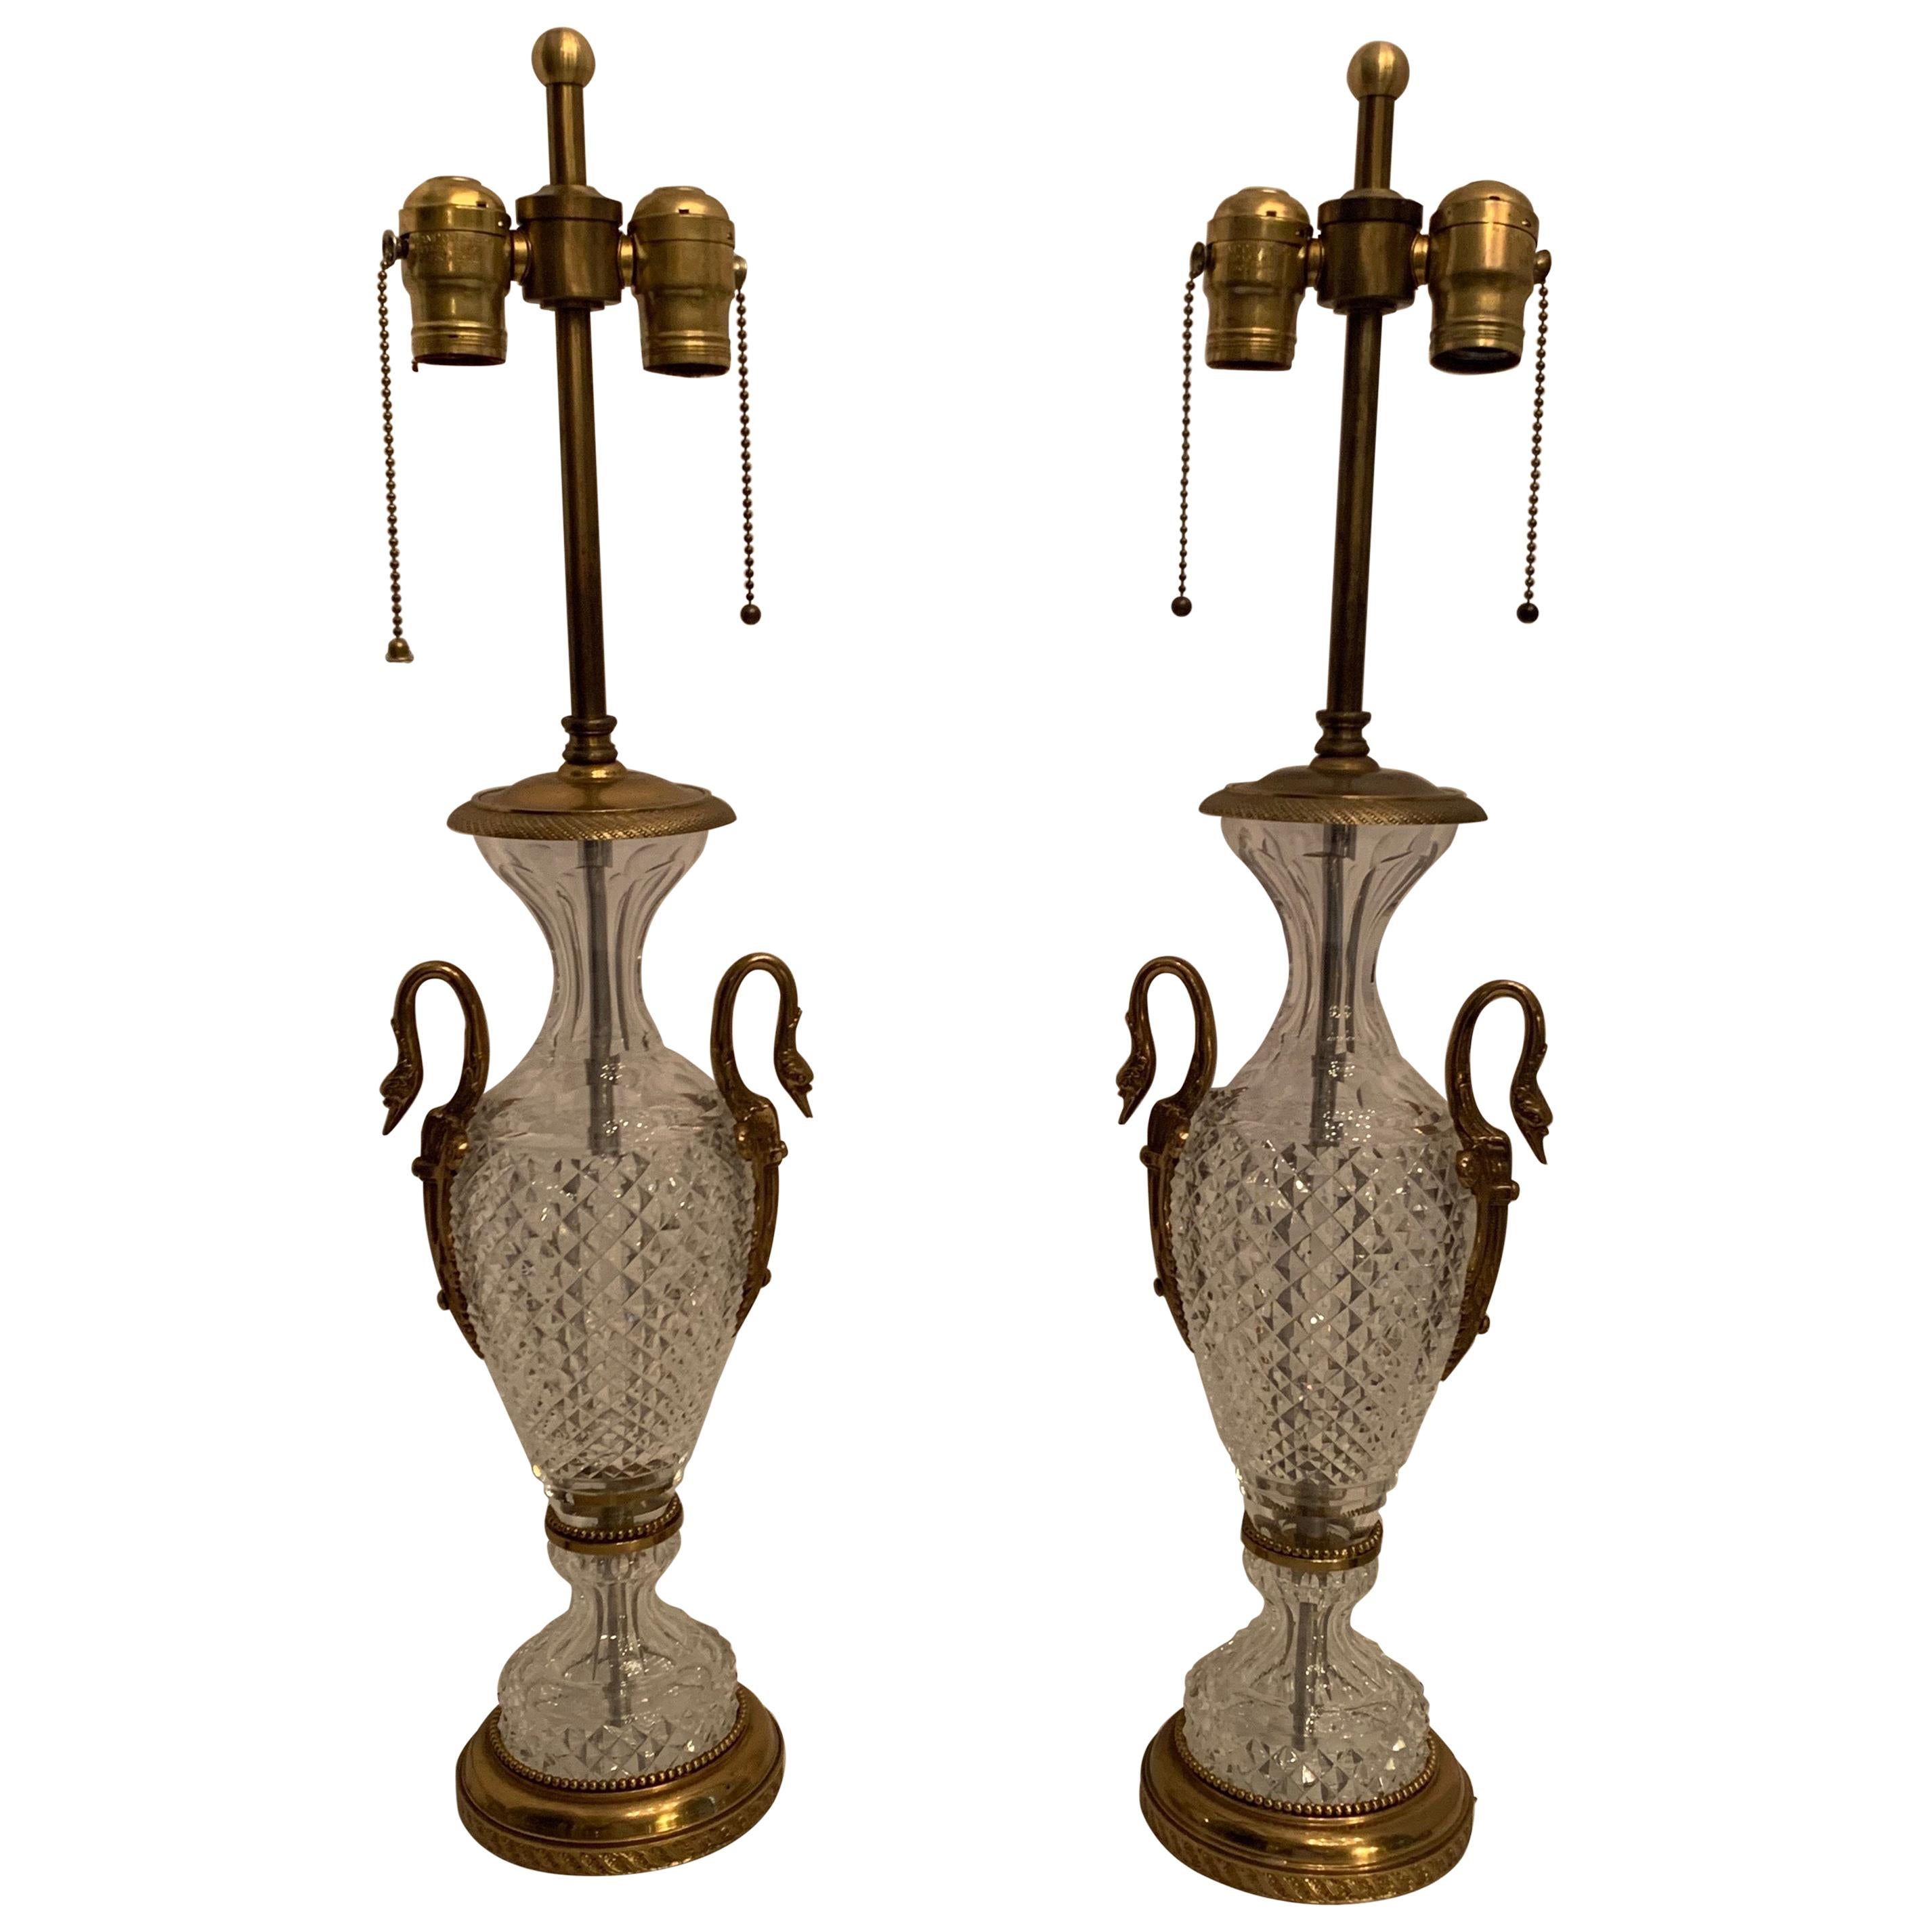 Wonderful French Neoclassical Swan Bronze Ormolu-Mounted Cut Crystal Lamps, Pair For Sale